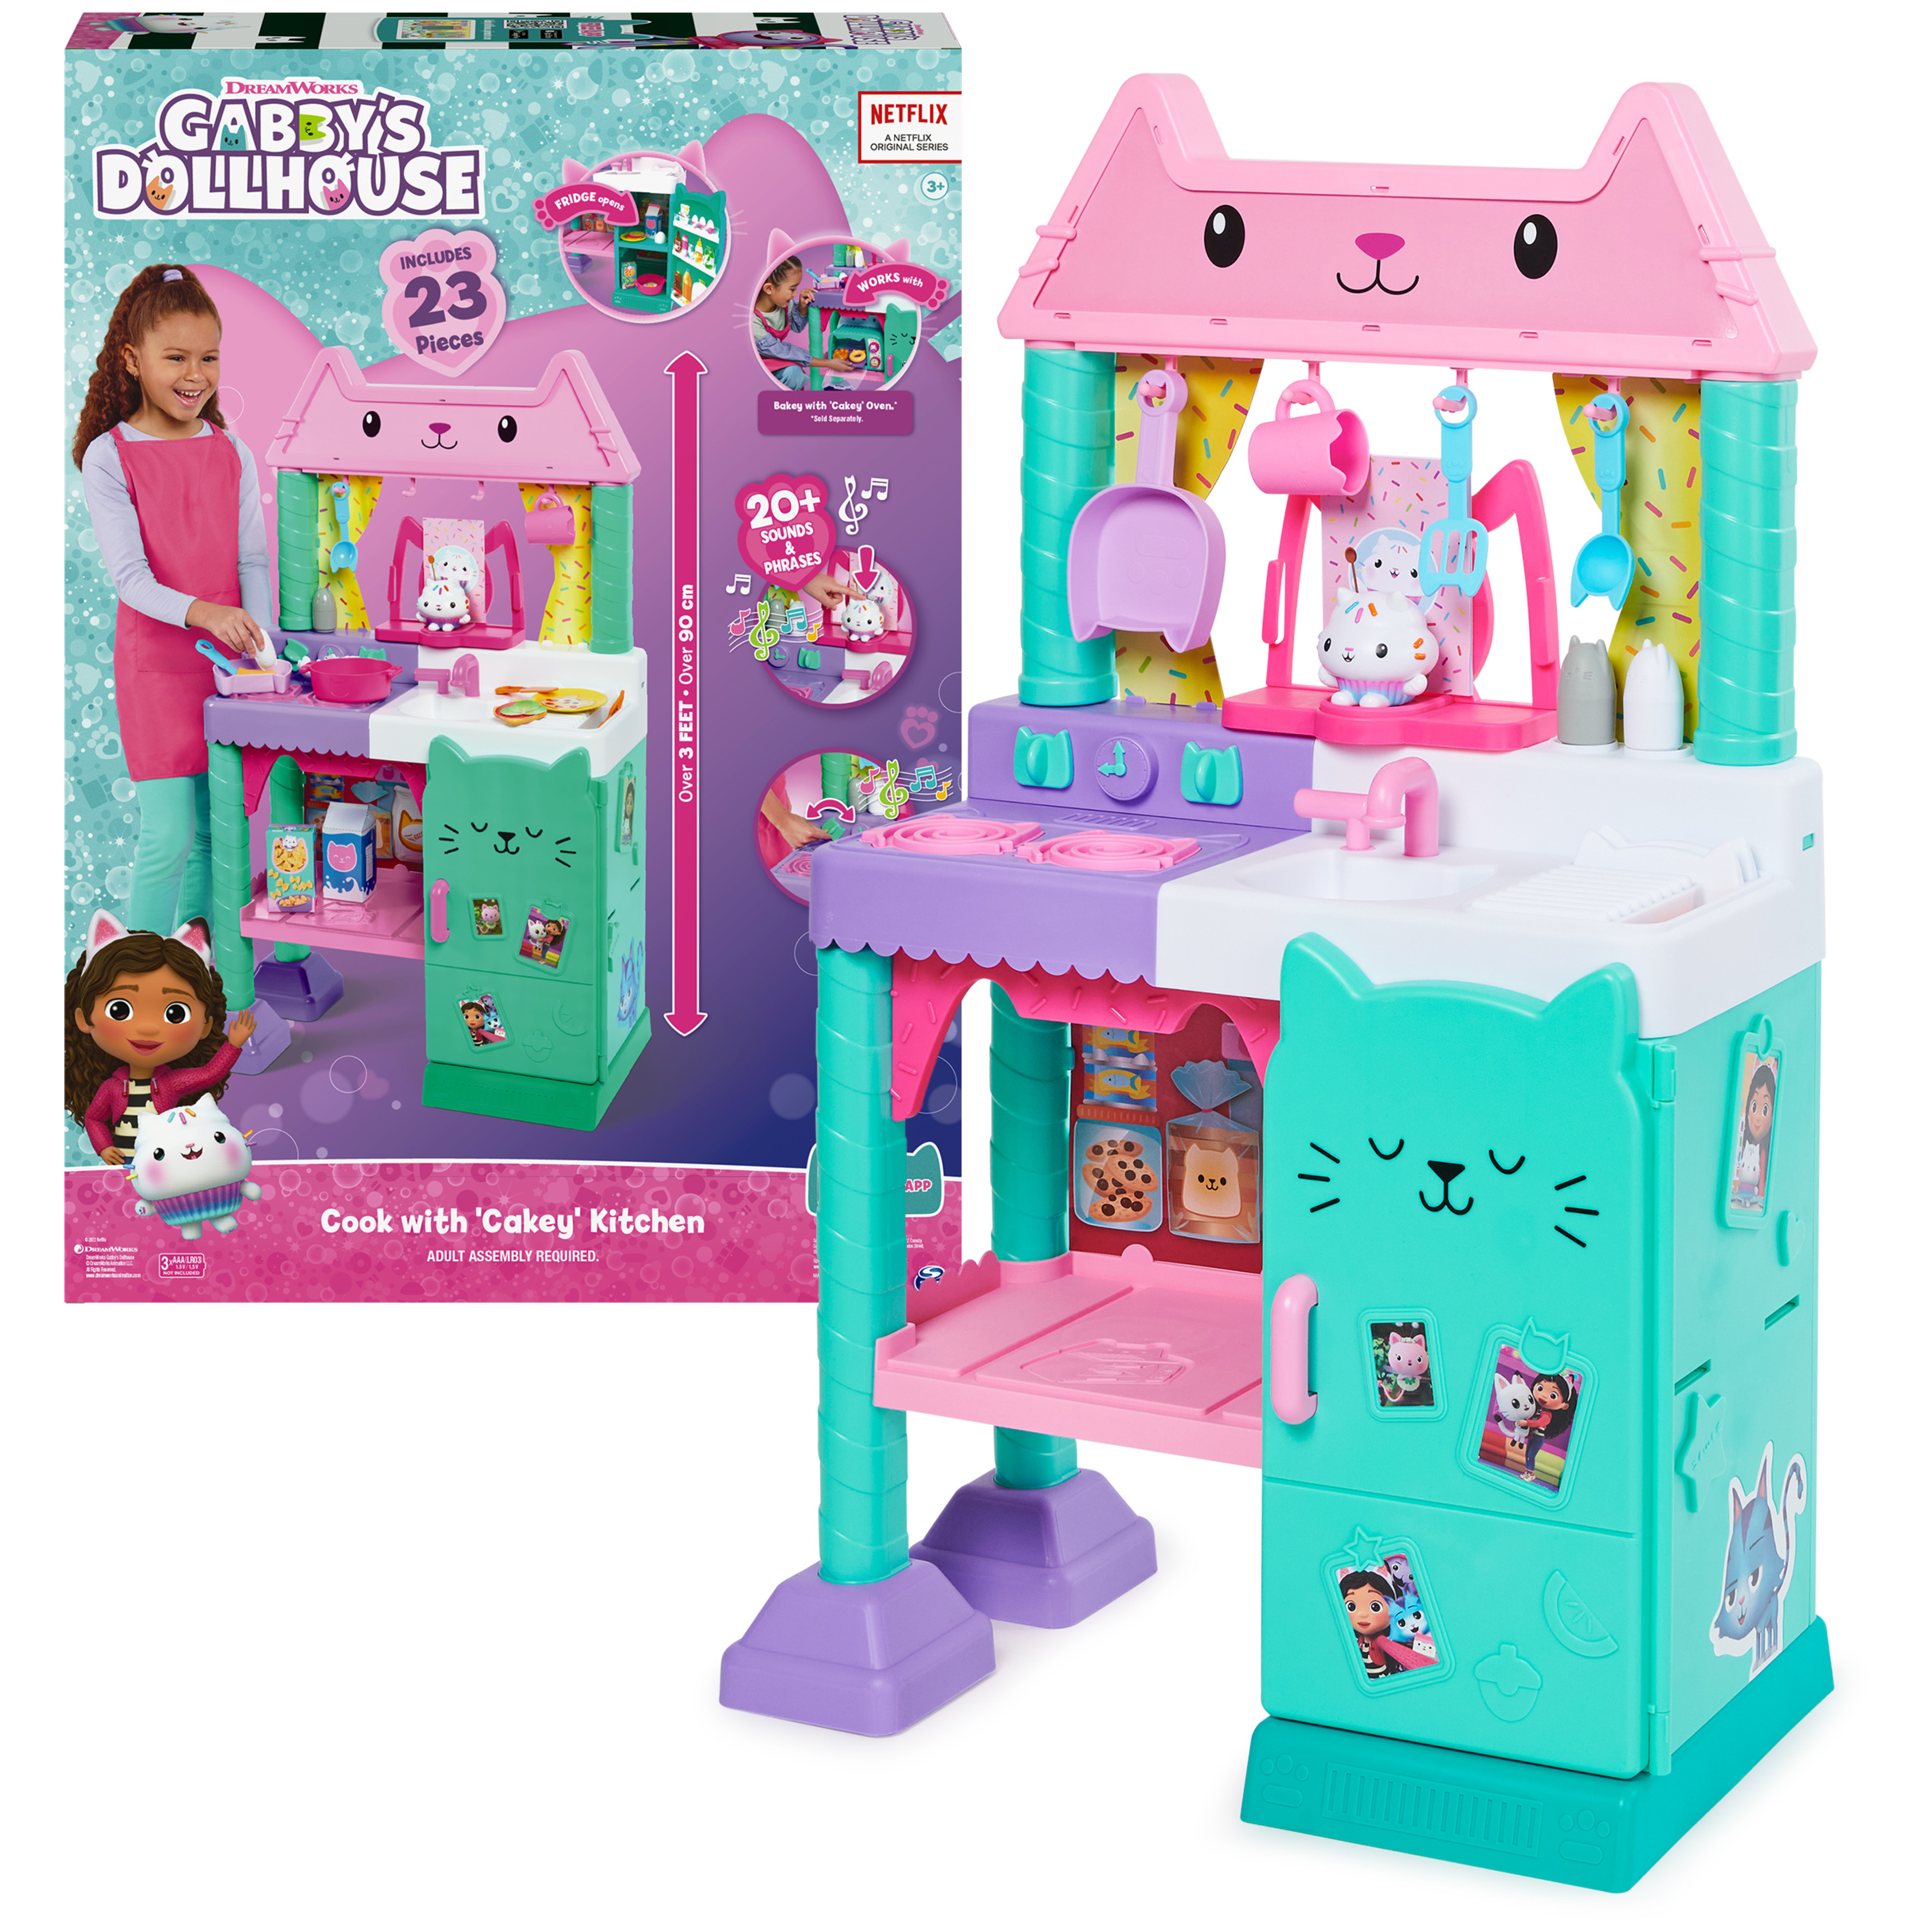 Gabby’s Dollhouse, Cakey Play Kitchen Set, for Kids Ages 3 and up - image 1 of 9